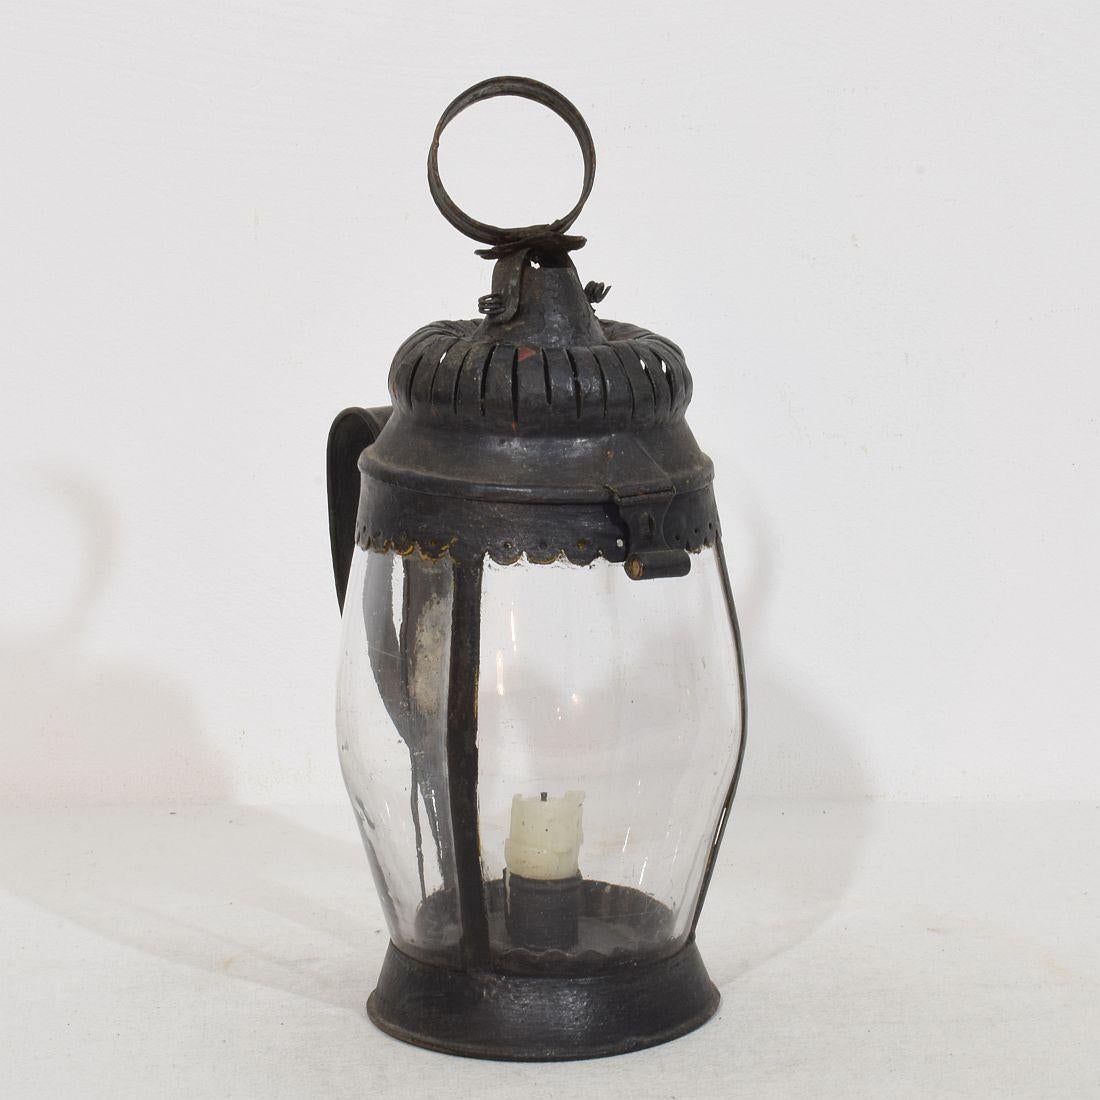 Very rare and early metal/ glass lantern, France, circa 1750-1800.
Wonderful period piece. Weathered and small repair from around 1900.
H:28cm  W:12,5cm D:15,5cm 